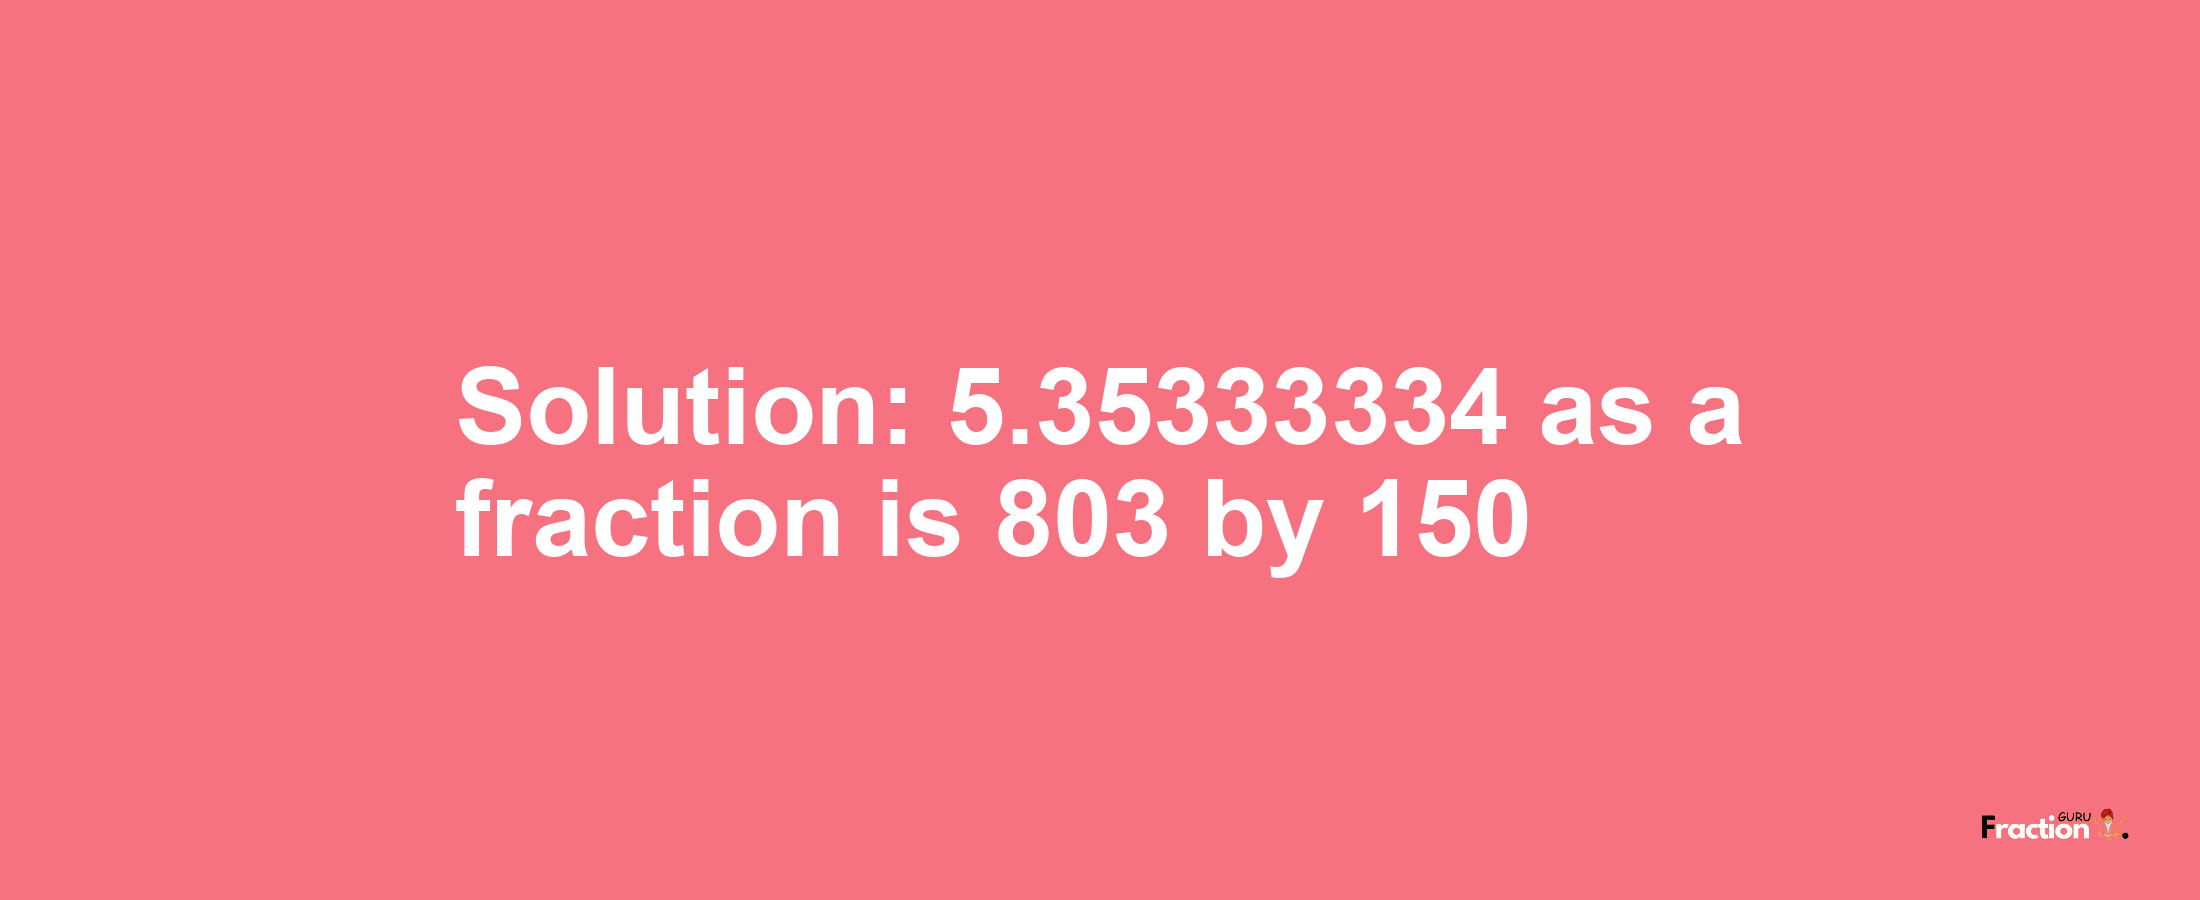 Solution:5.35333334 as a fraction is 803/150